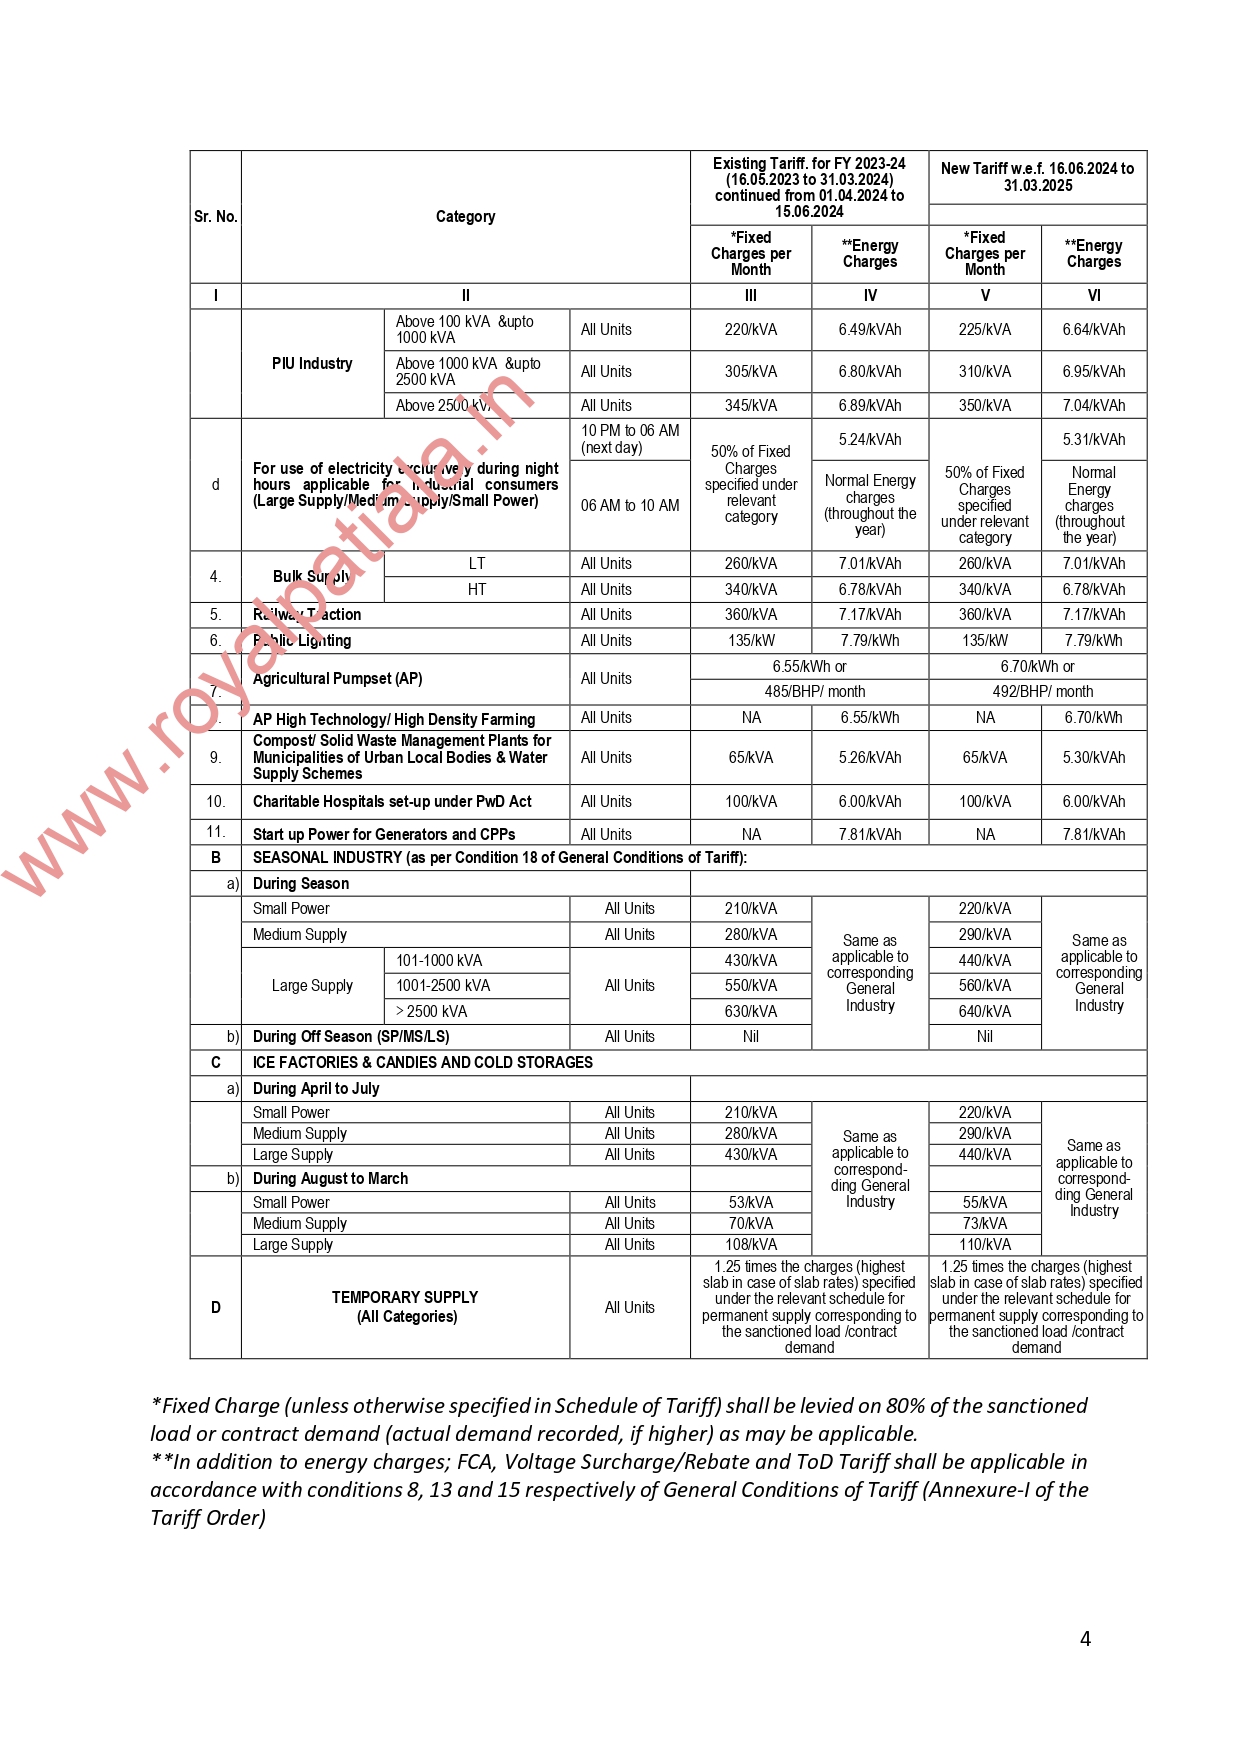 Punjab State Electricity Regulatory Commission announces Tariff Orders for FY 2024-25 for PSPCL & PSTCL